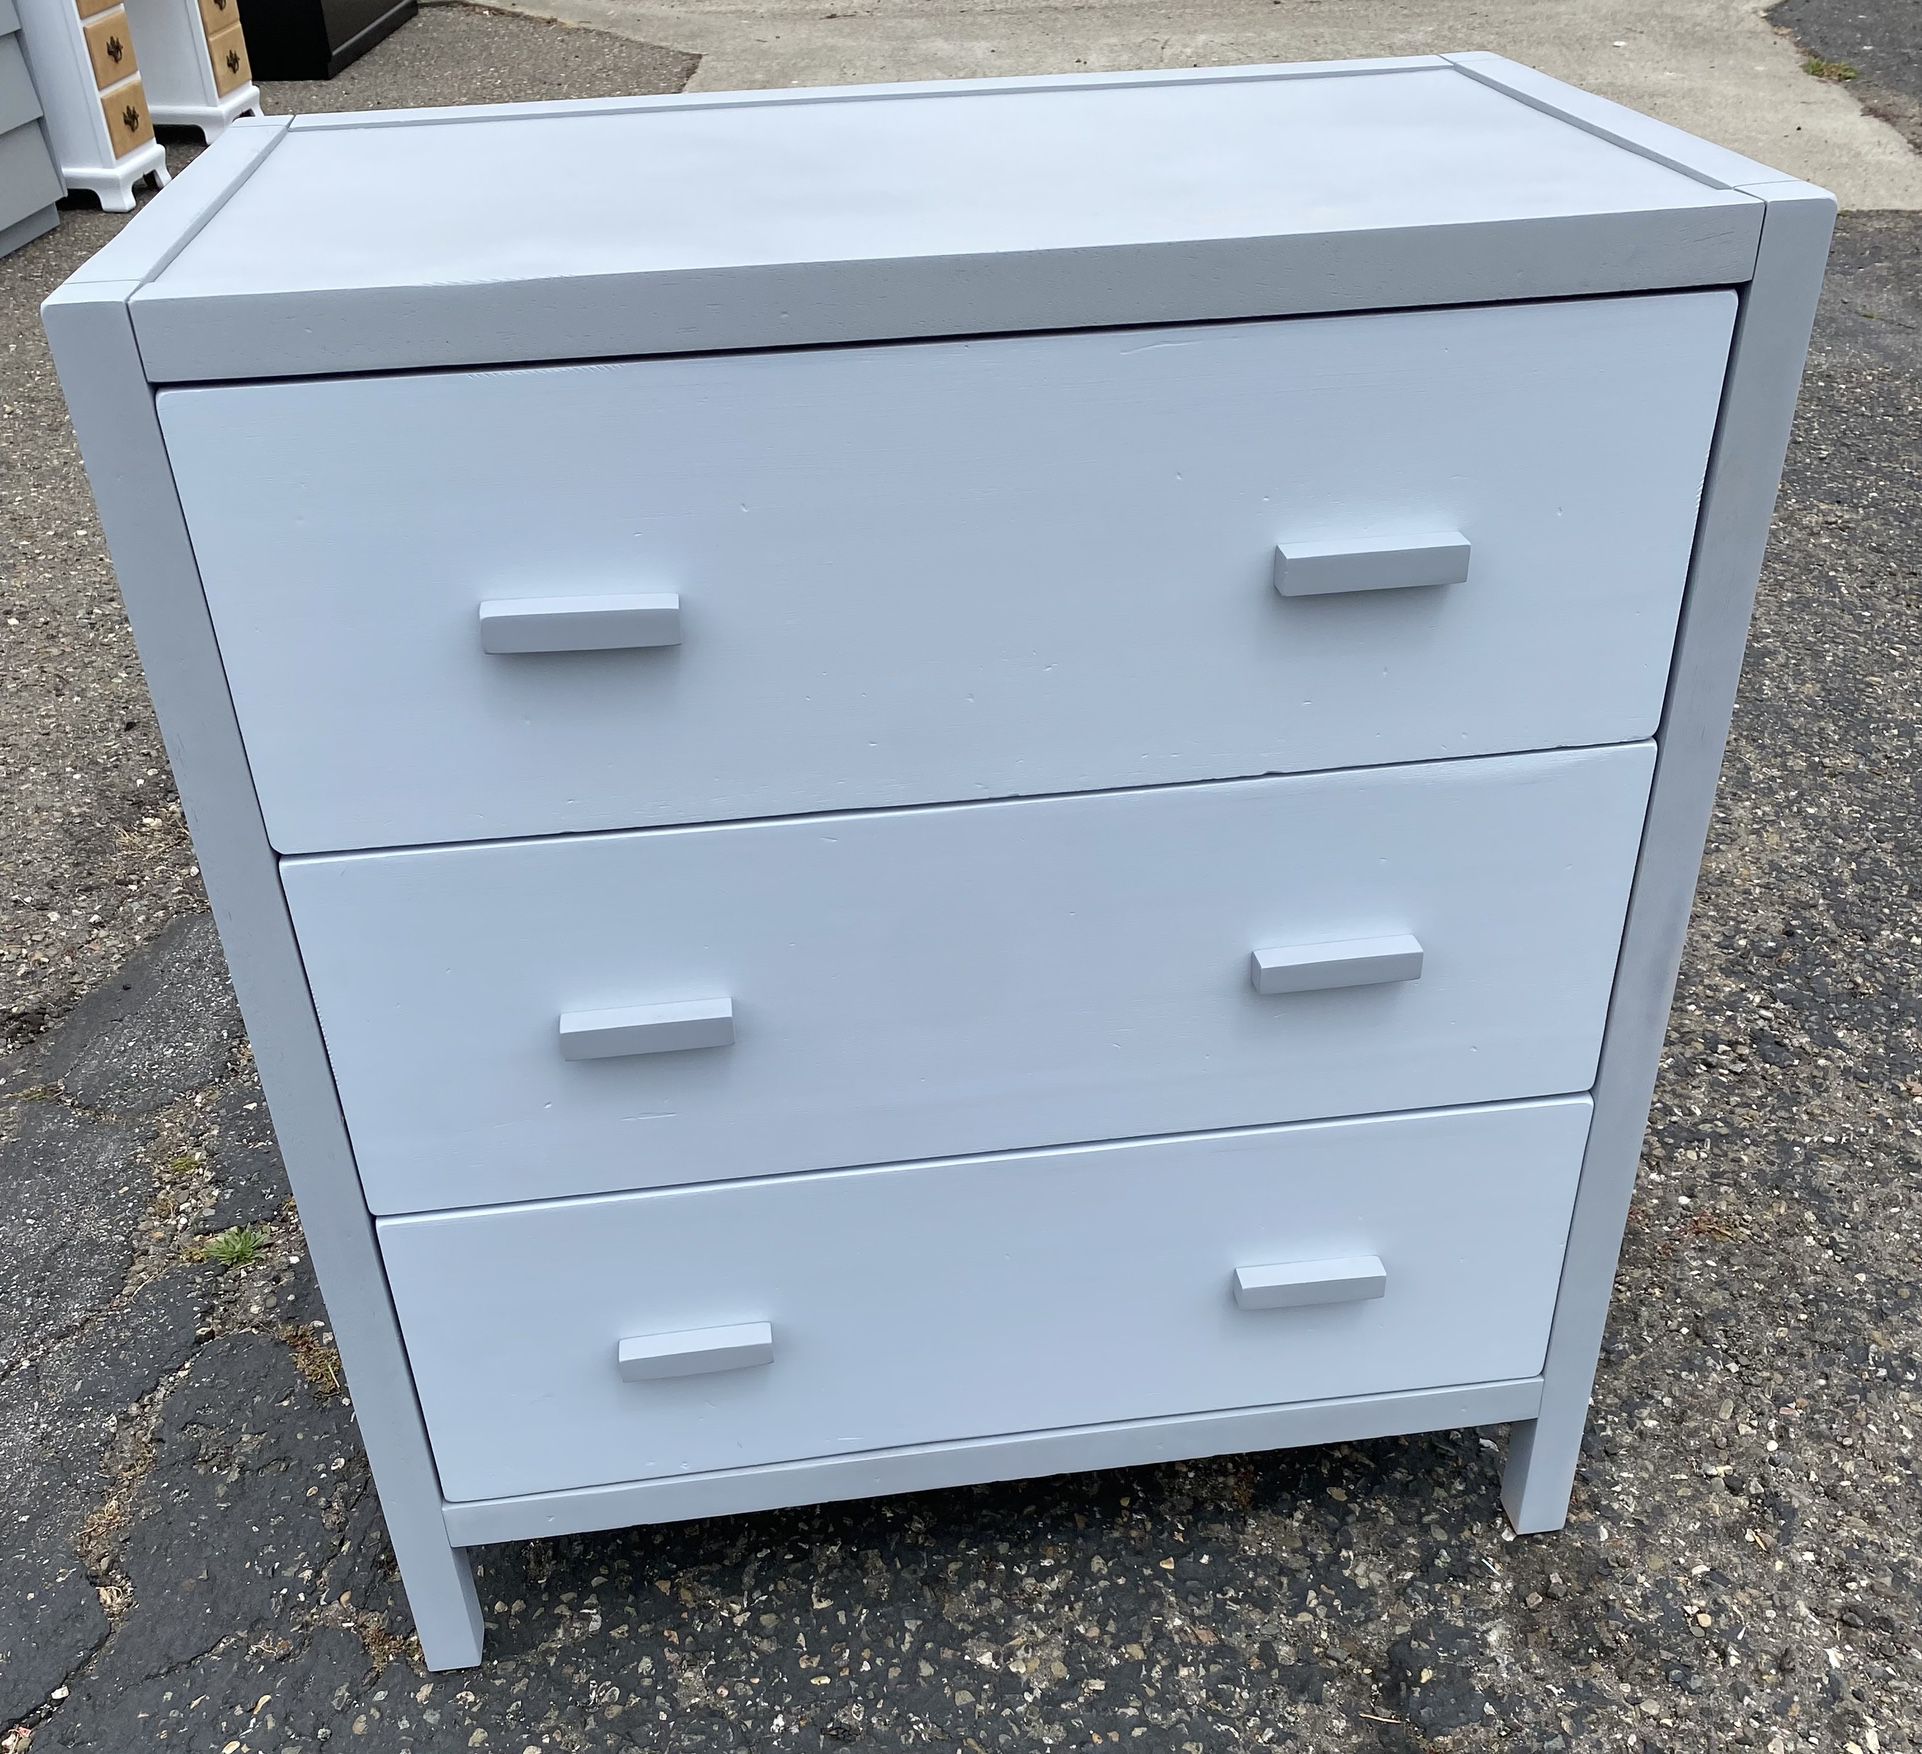 Dresser two tone gray 3 big easy sliding drawers #0590 Made in Malaysia using a kind of mahogany and pressboard.  I painted the body a medium gray and